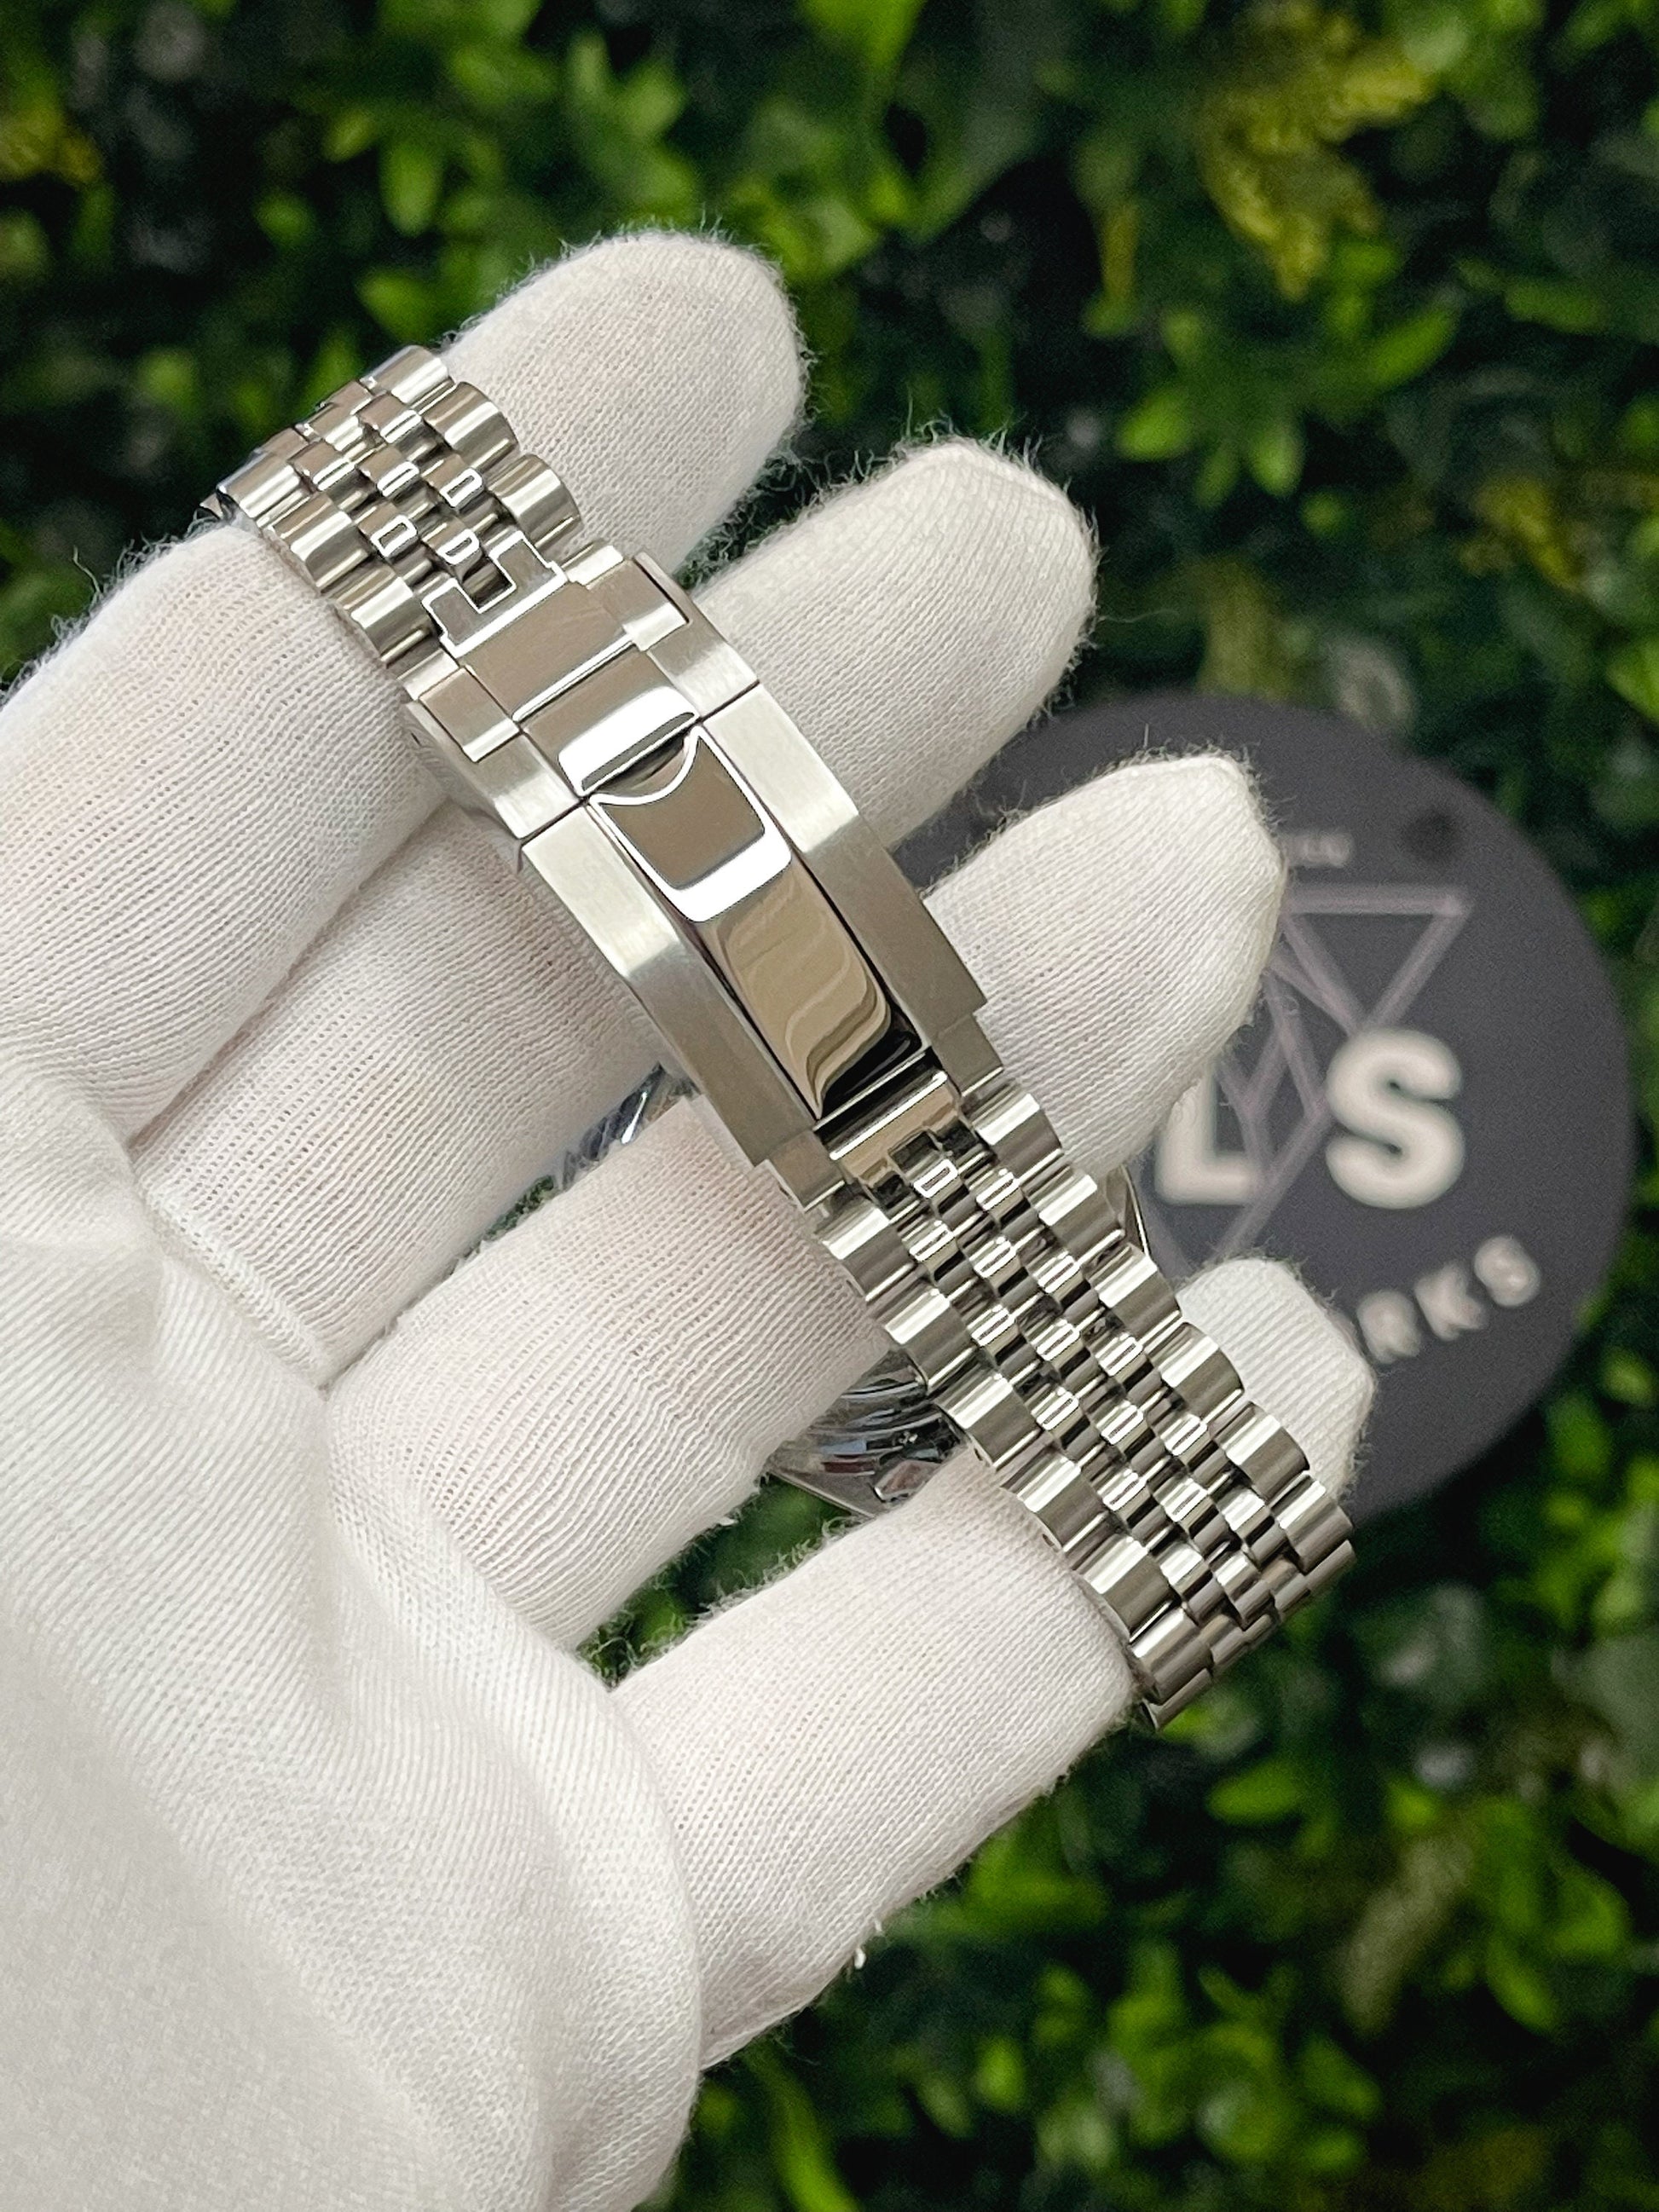 The "SNXSJUST" Genuine Seiko SNXS Modified (Silver Dial)  DJ Homage  w/ Sapphire Crystal, Fluted Bezel, and Jublee style Bracelet